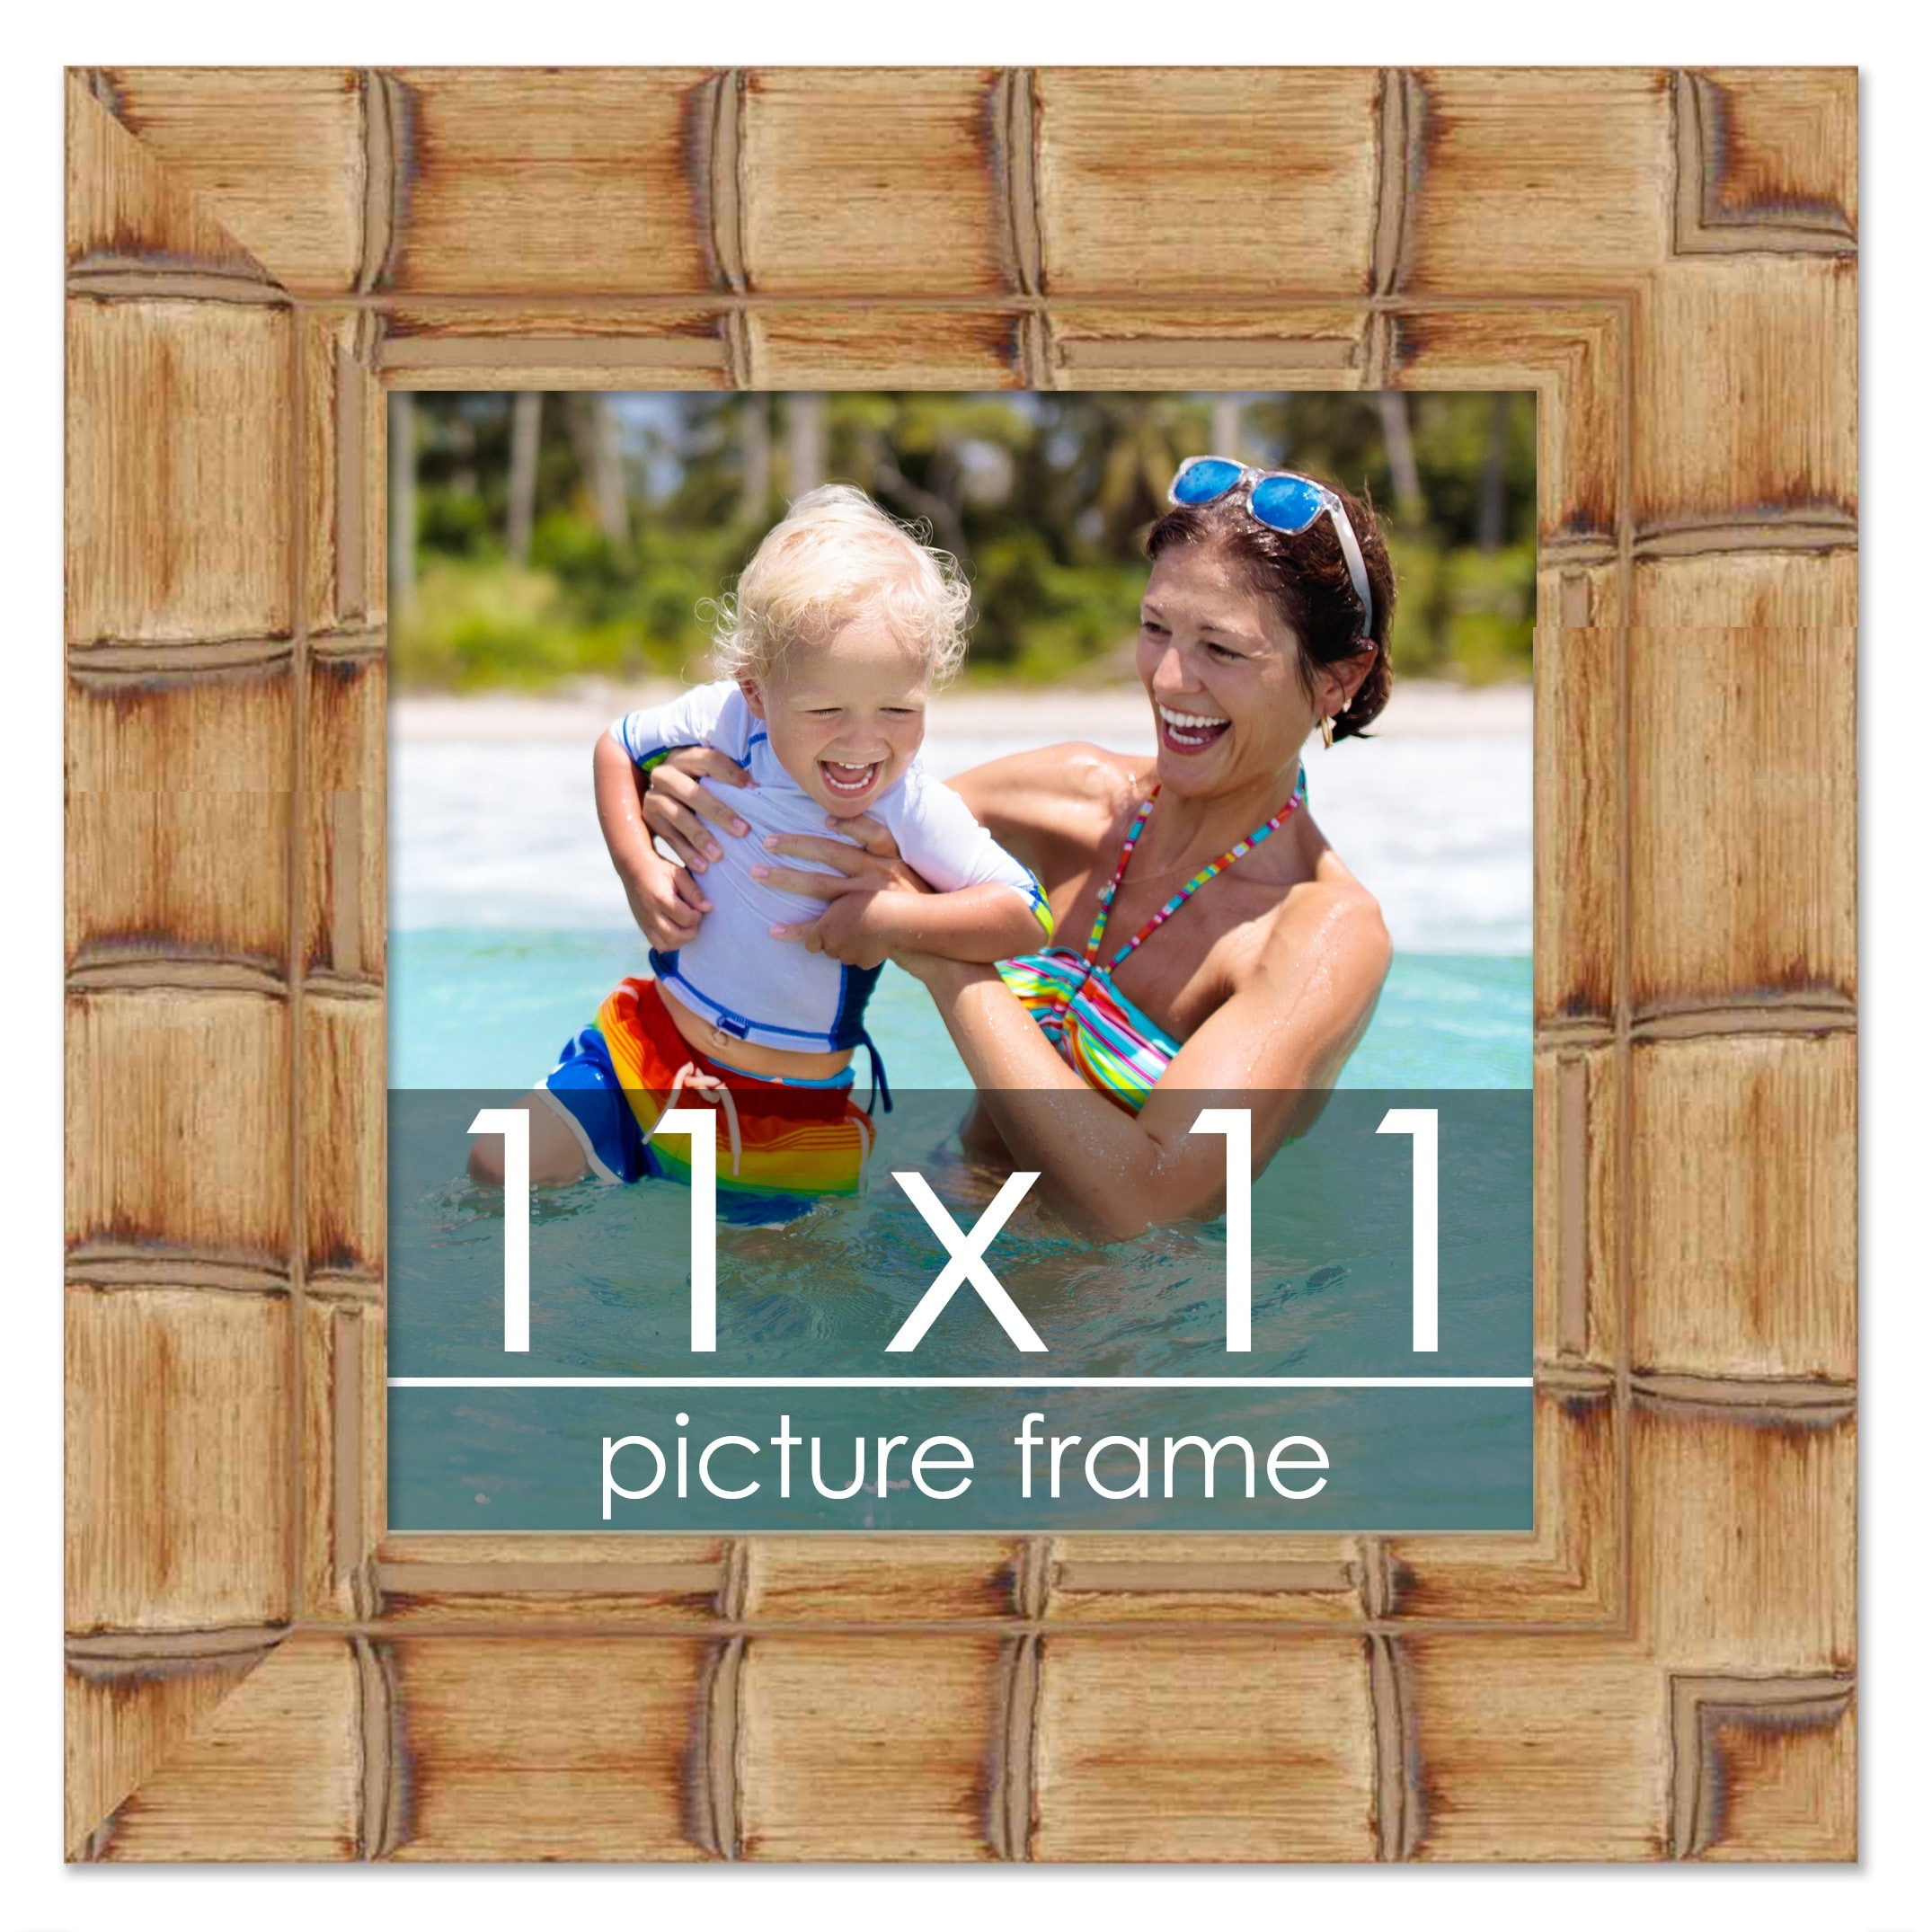 https://ak1.ostkcdn.com/images/products/is/images/direct/1bff8975ccd30f1b24120bc69ee3f44336060f64/11x11-Bamboo-Natural-Wood-Picture-Square-Frame---Picture-Frame-Includes-UV-Acrylic%2C-Foam-Board-Backing%2C-%26-Hanging-Hardware%21.jpg